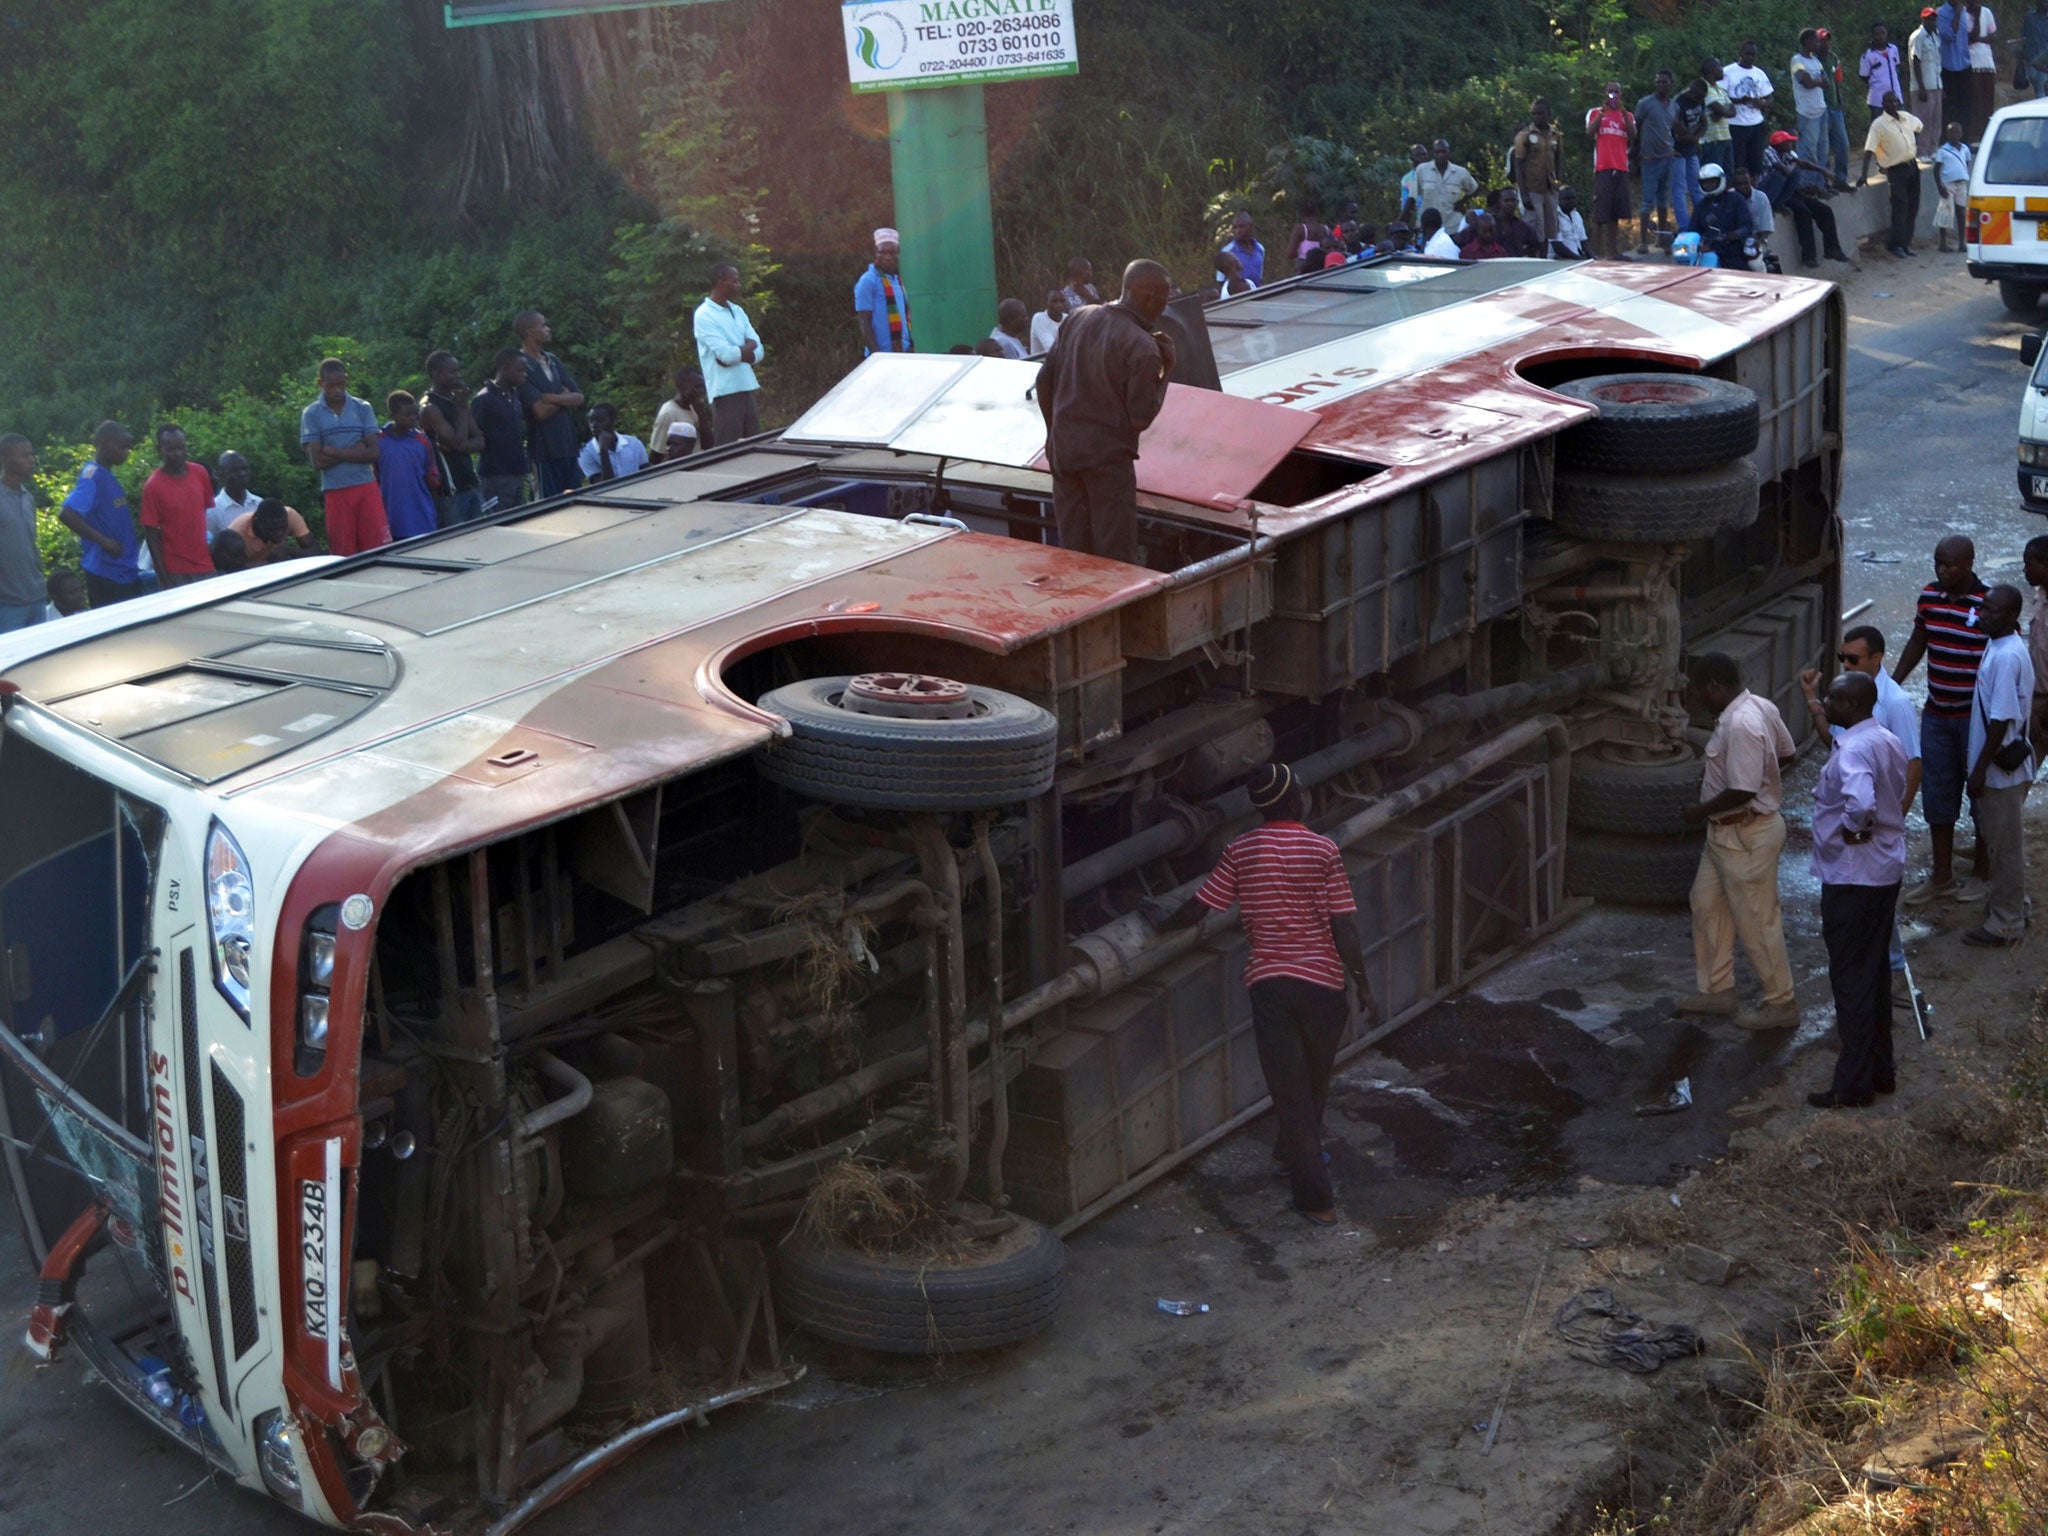 Up to 15 Britons have been hurt in a bus crash in Kenya